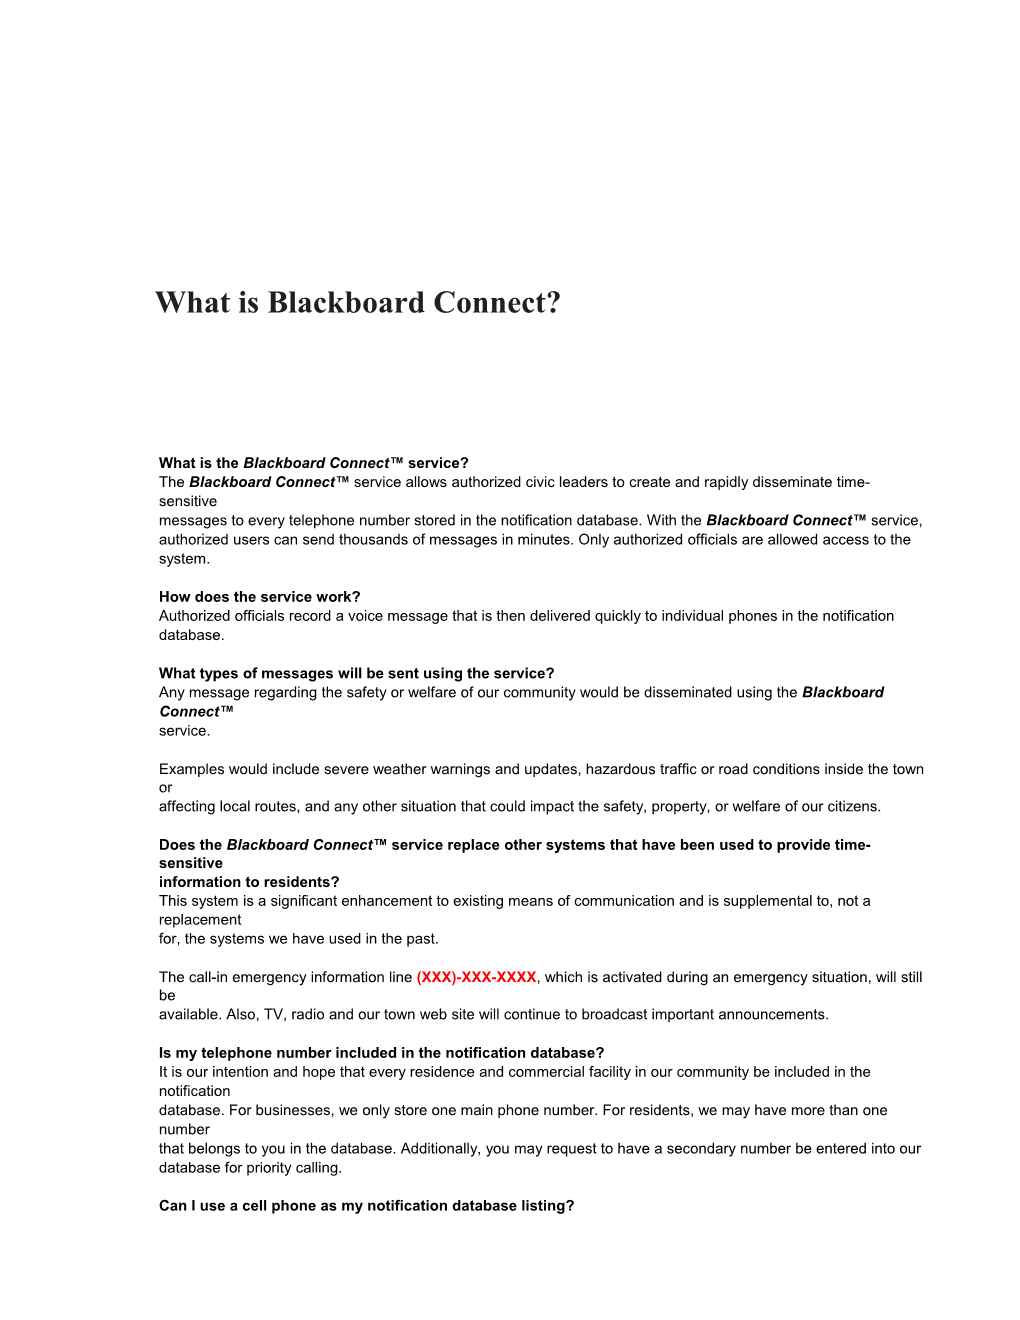 What Is the Blackboard Connect Service?